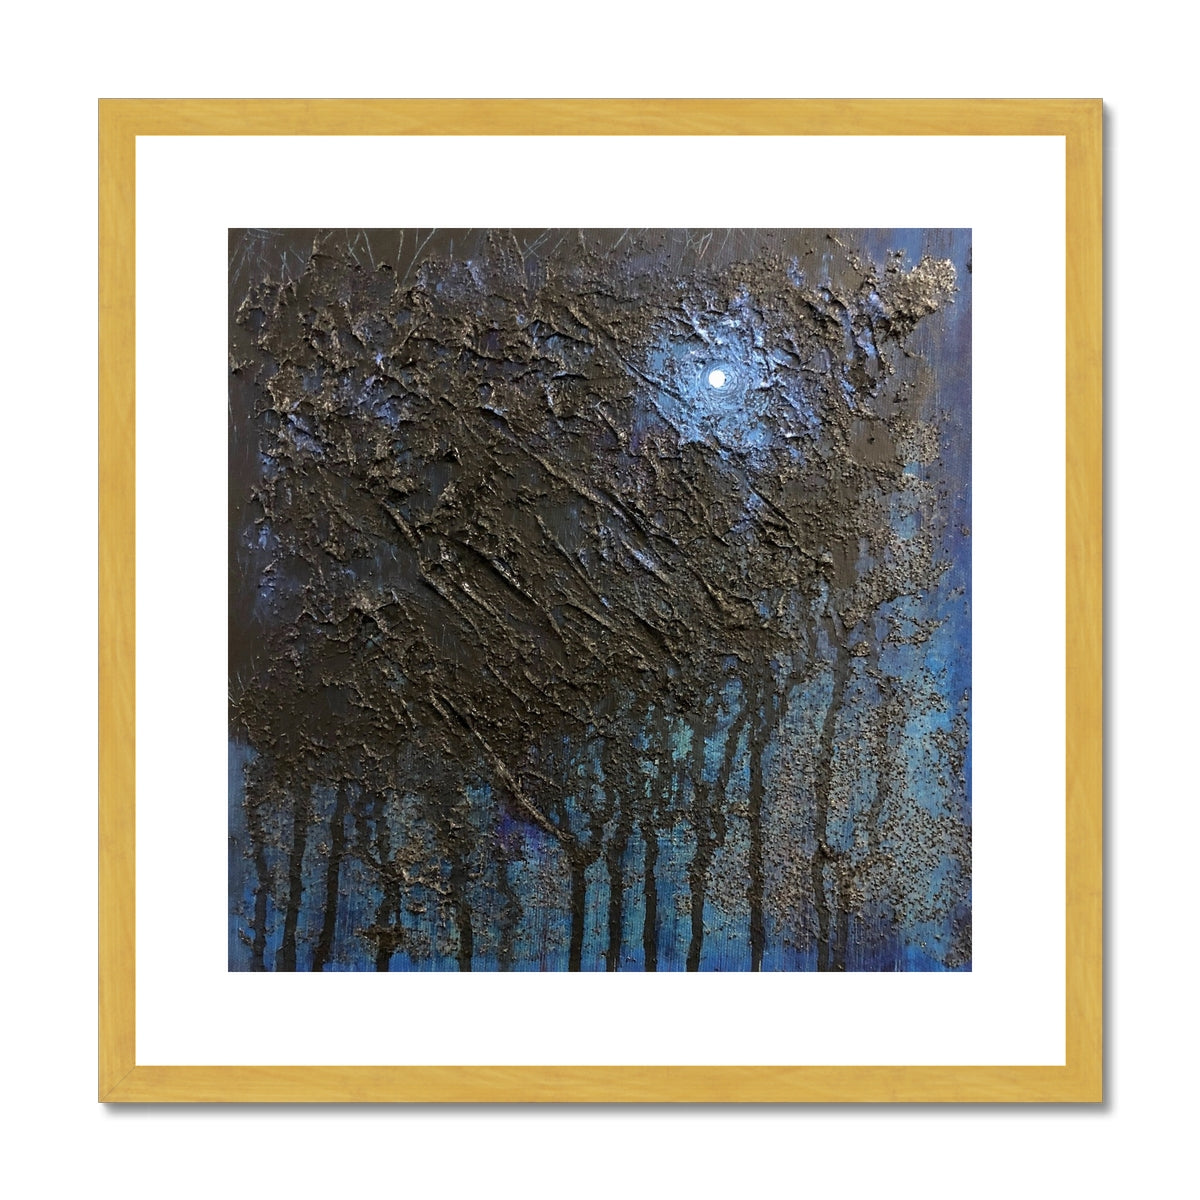 The Blue Moon Wood Abstract Painting | Antique Framed & Mounted Prints From Scotland-Antique Framed & Mounted Prints-Abstract & Impressionistic Art Gallery-20"x20"-Gold Frame-Paintings, Prints, Homeware, Art Gifts From Scotland By Scottish Artist Kevin Hunter